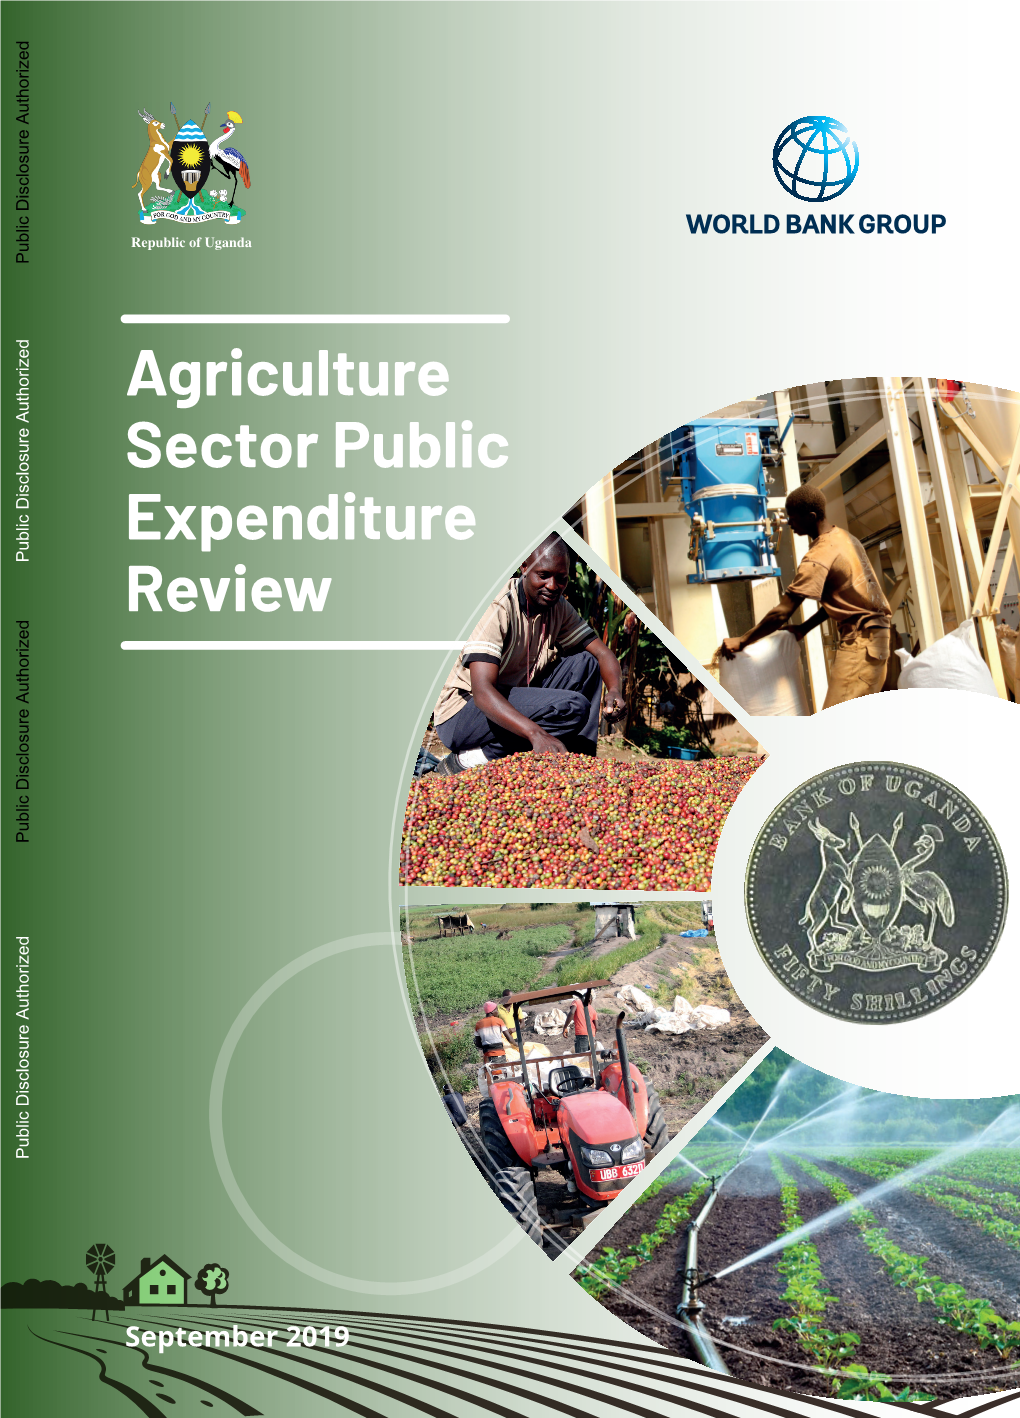 Uganda: Agriculture Sector Public Expenditure Review